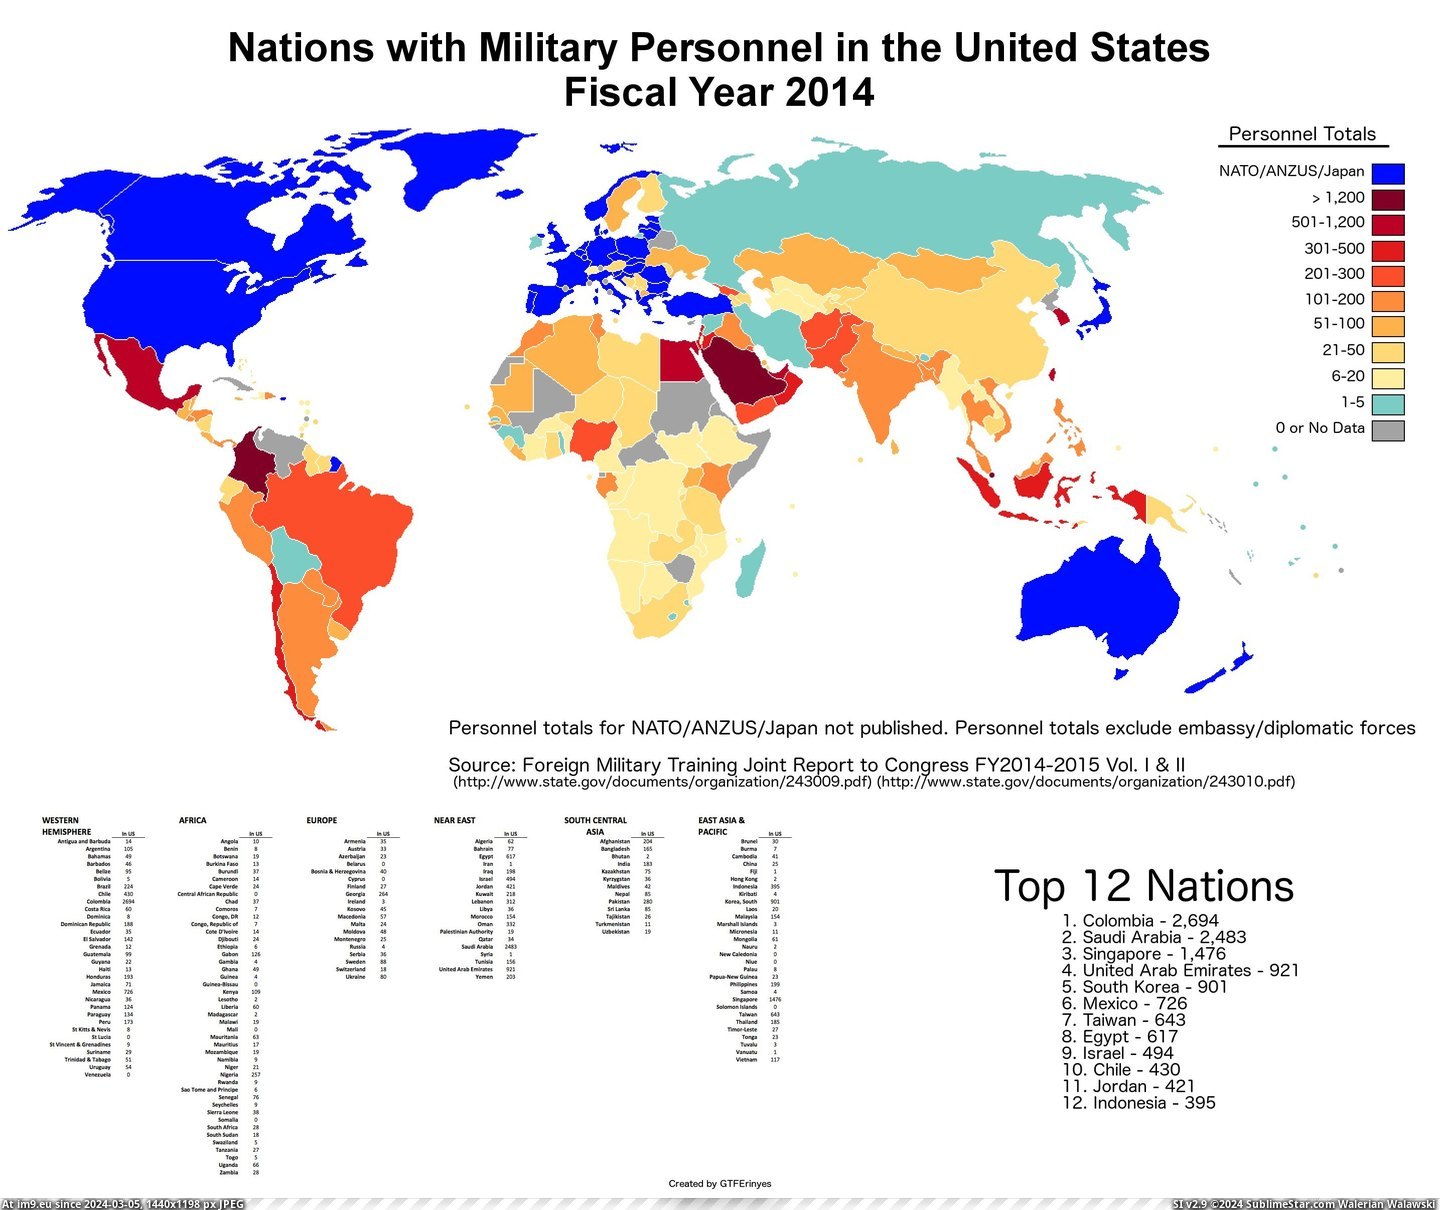 #States #Japan #United #Plot #Nato #Embassy #Military #Nations #Twist [Mapporn] Plot Twist: Nations with military personnel INSIDE the United States in 2014 (excluding NATO-ANZUS-Japan and embassy-d Pic. (Bild von album My r/MAPS favs))